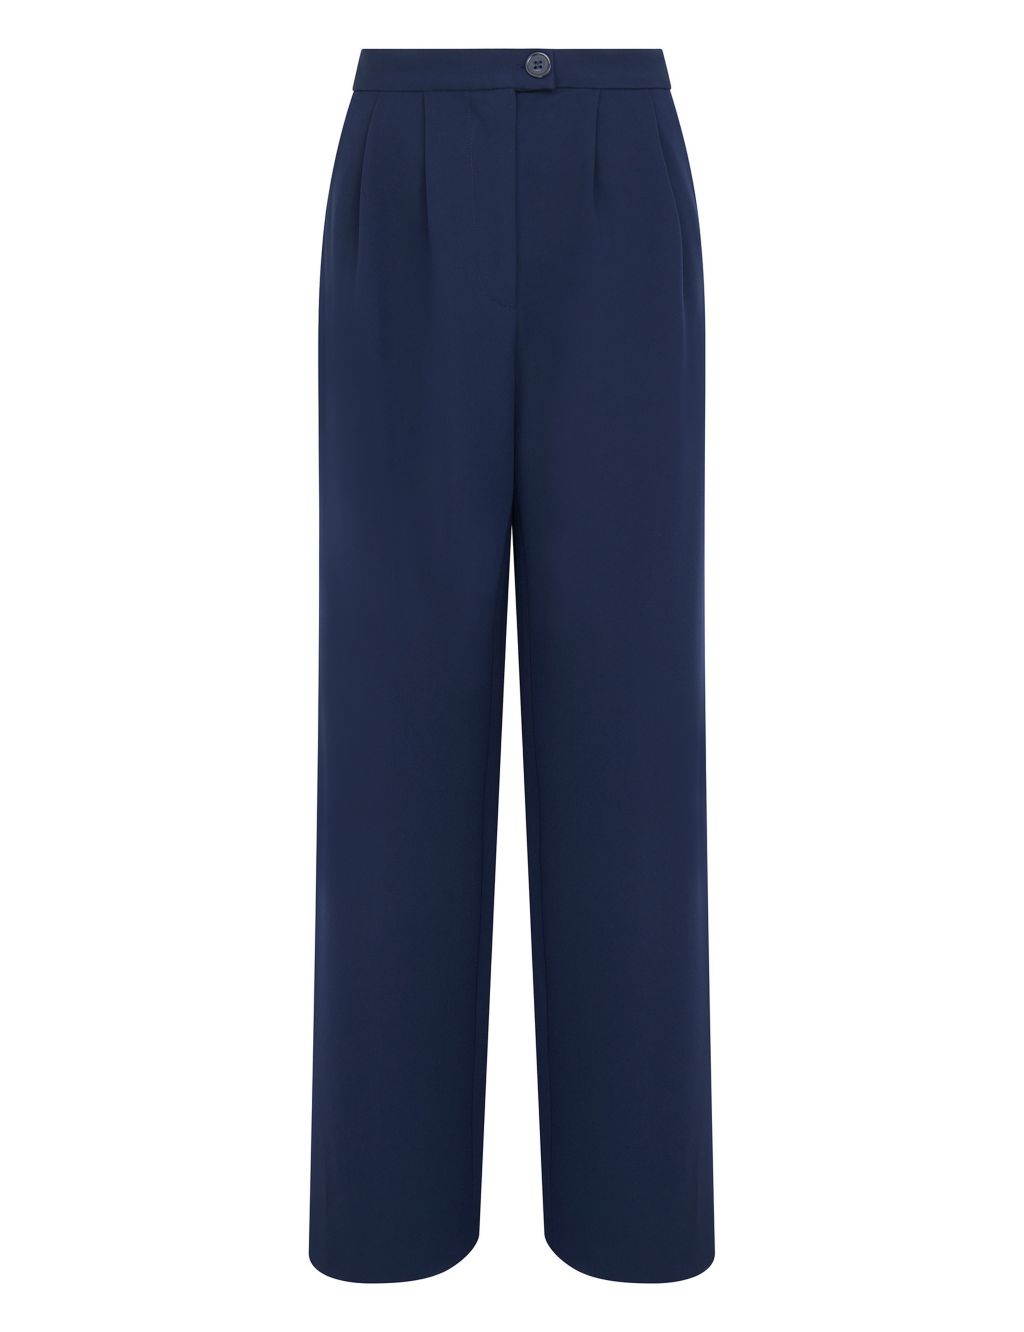 High Waisted Wide Leg Trousers image 2